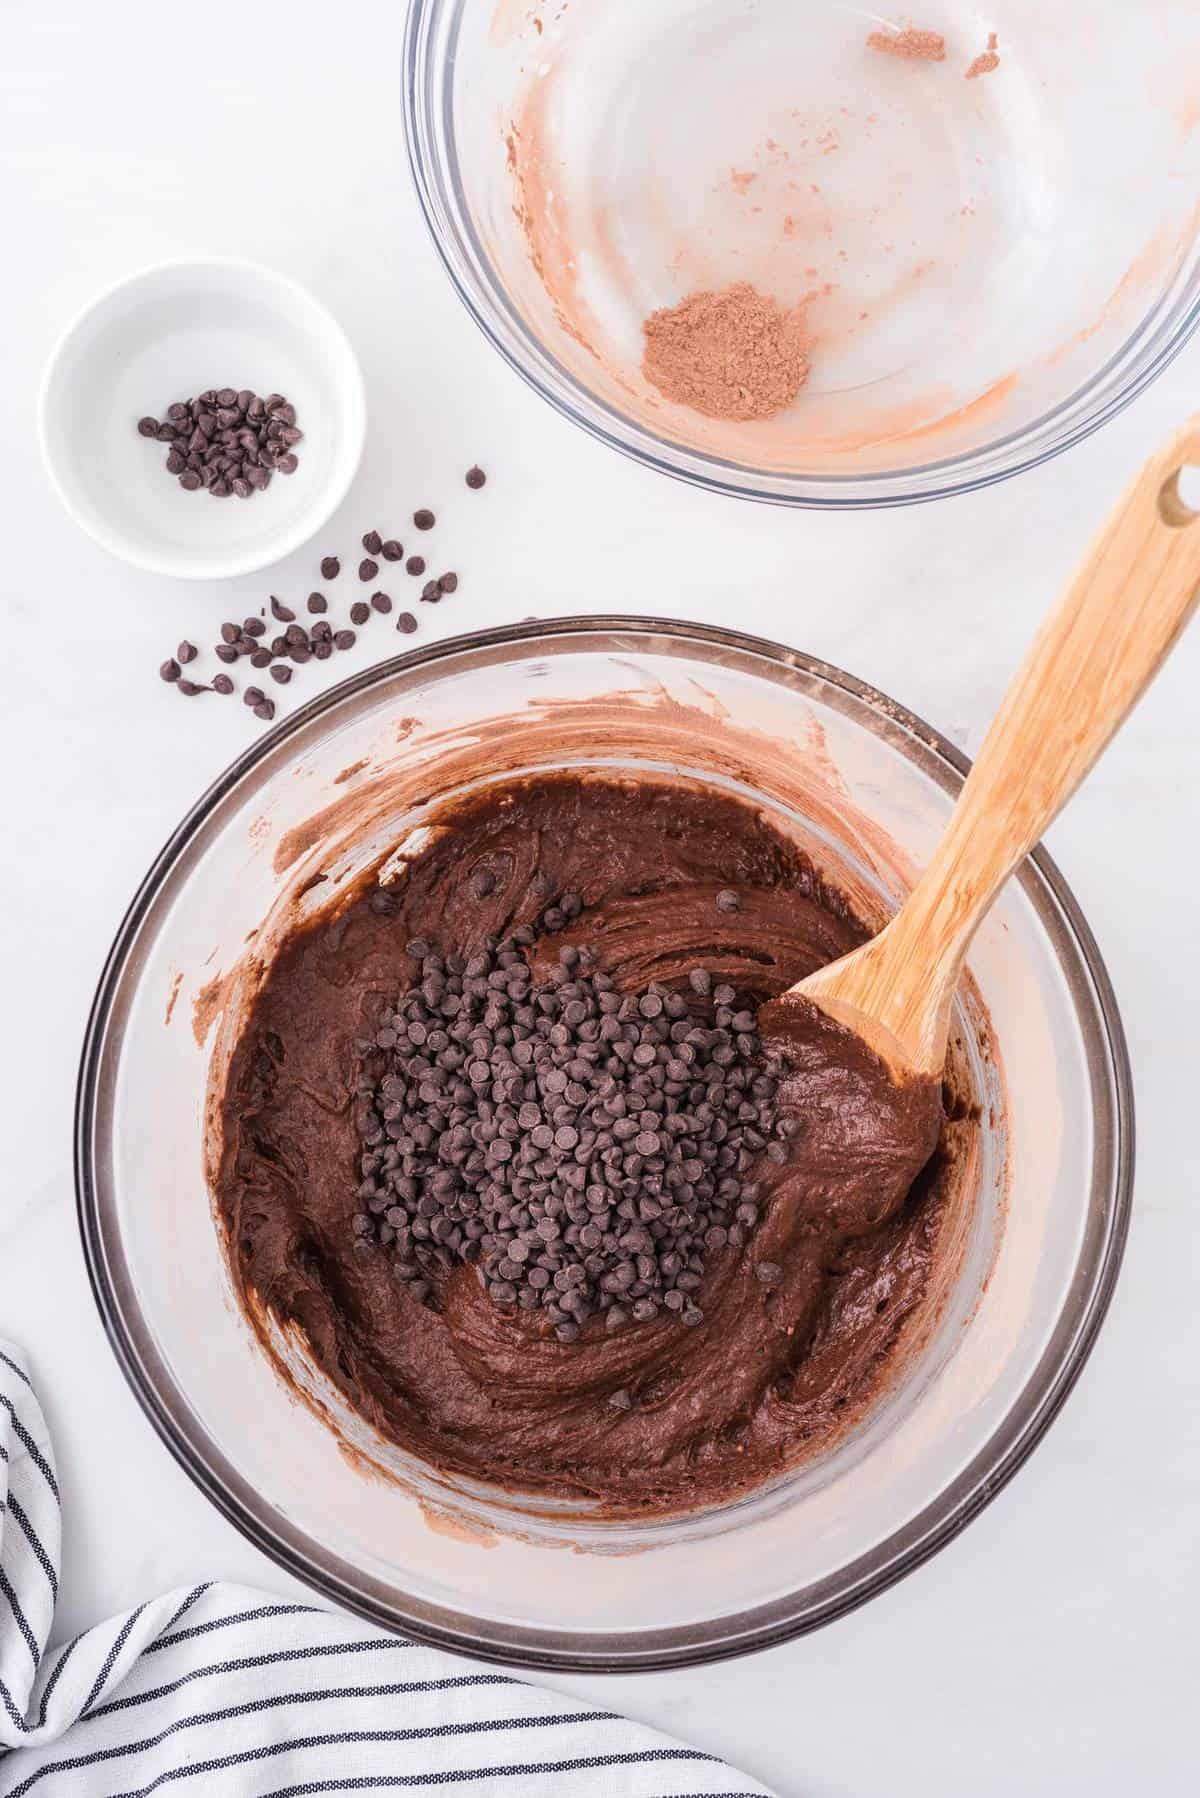 pour in the chocolate chips into the mixture